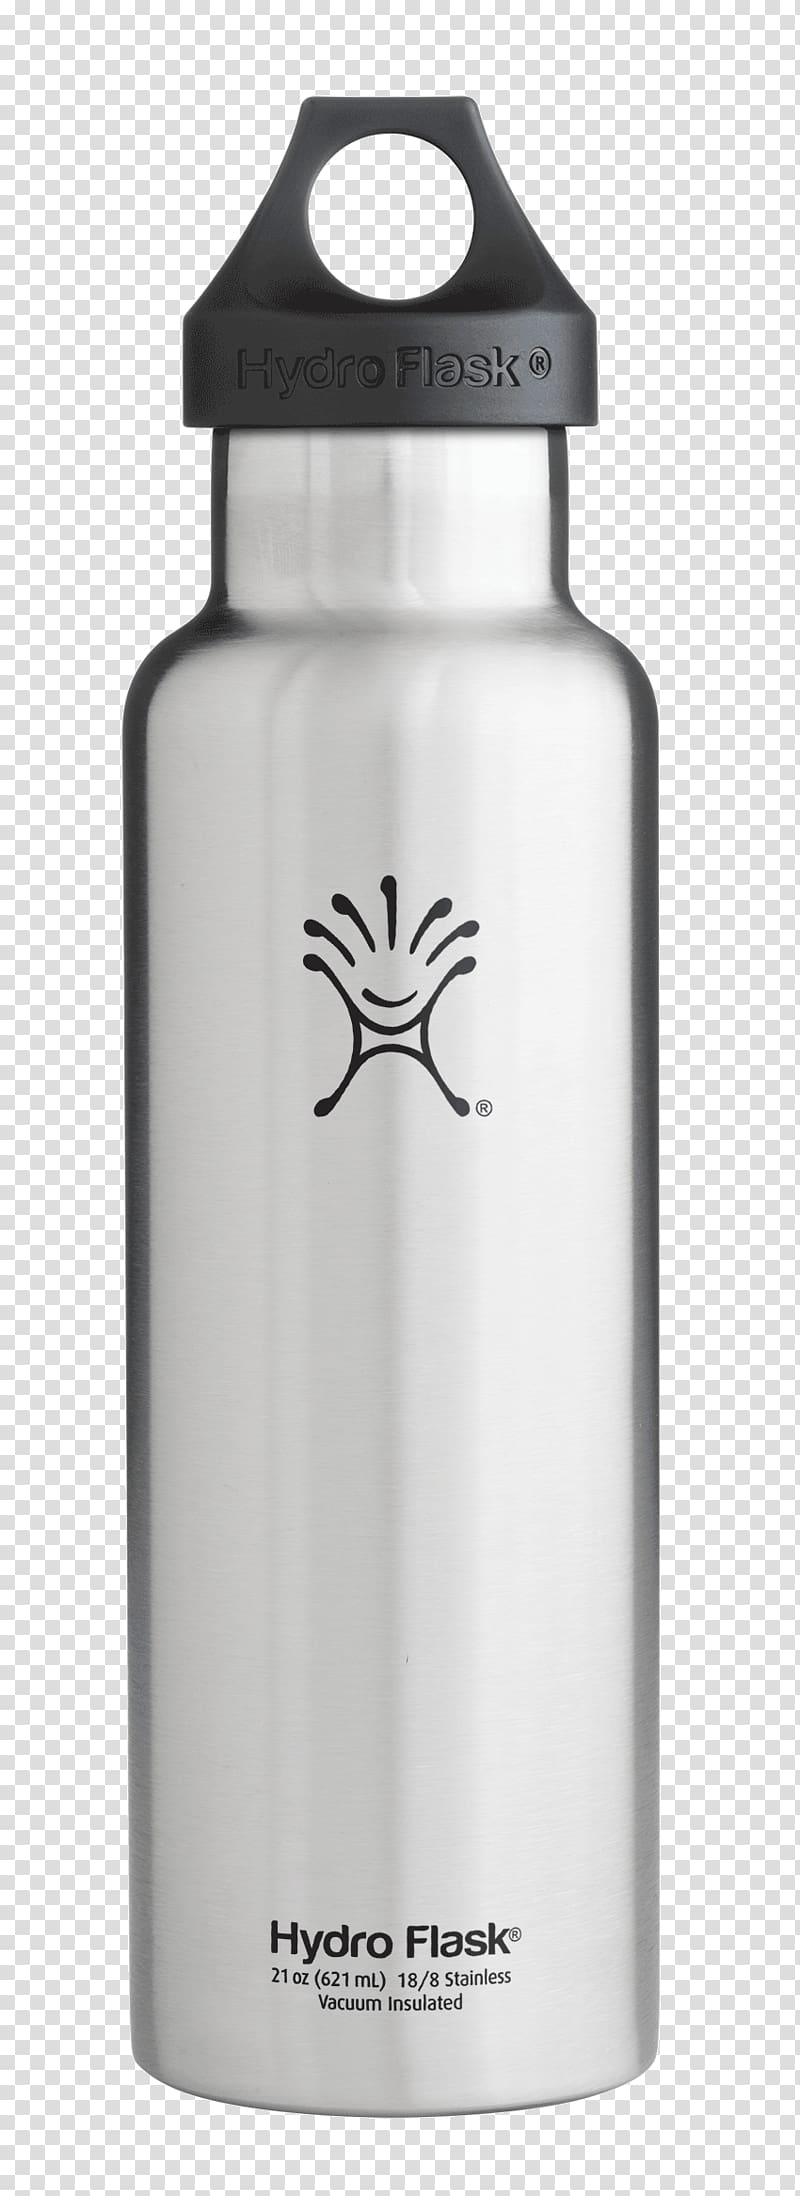 Water Bottles Thermal insulation Vacuum insulated panel Hydro Flask, bottle transparent background PNG clipart